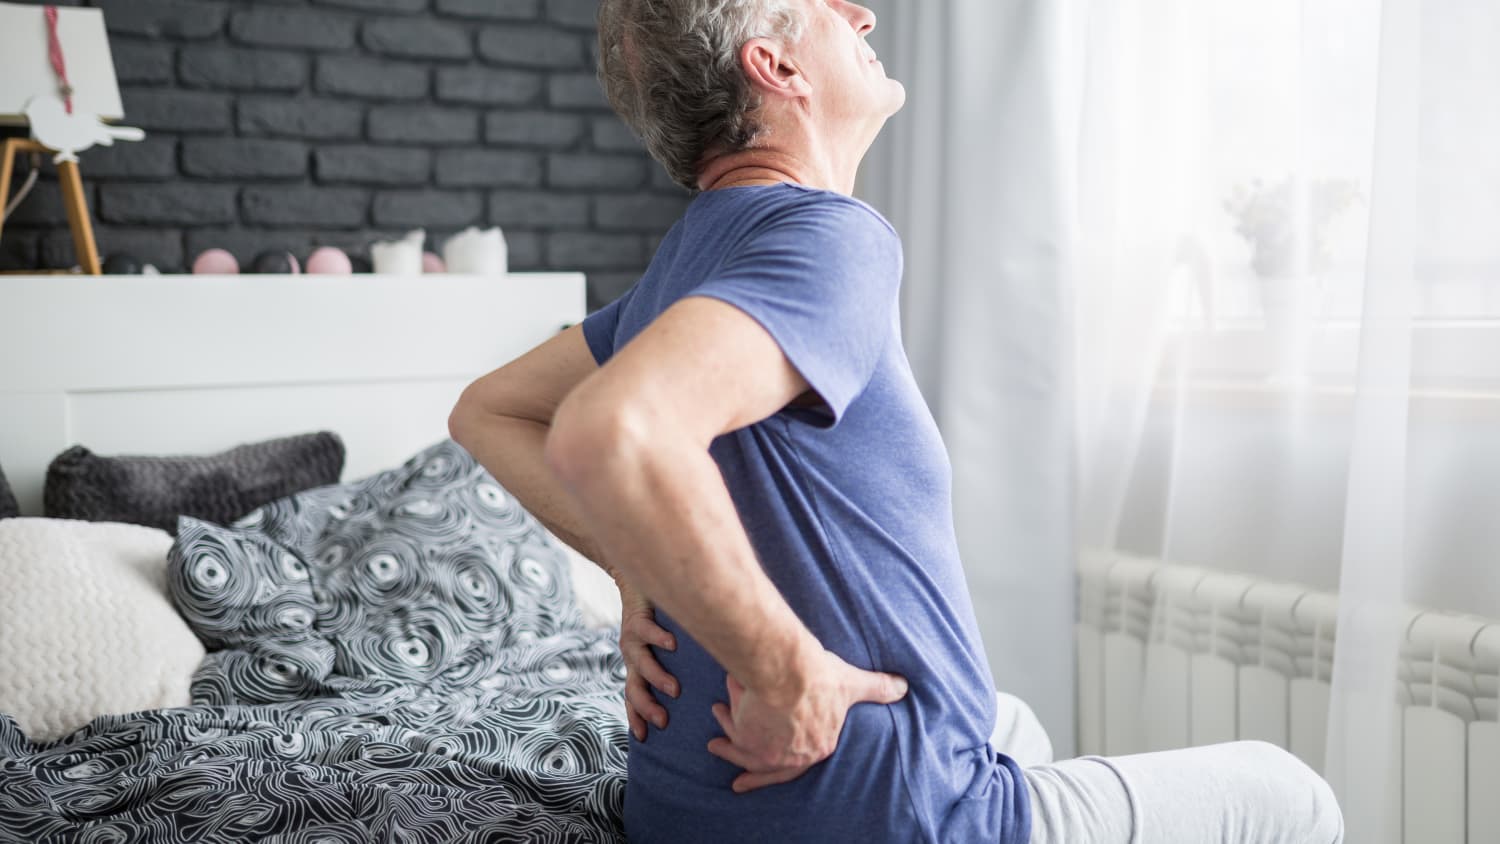 A man suffering from glomerulonephritis grabs his lower back in pain.